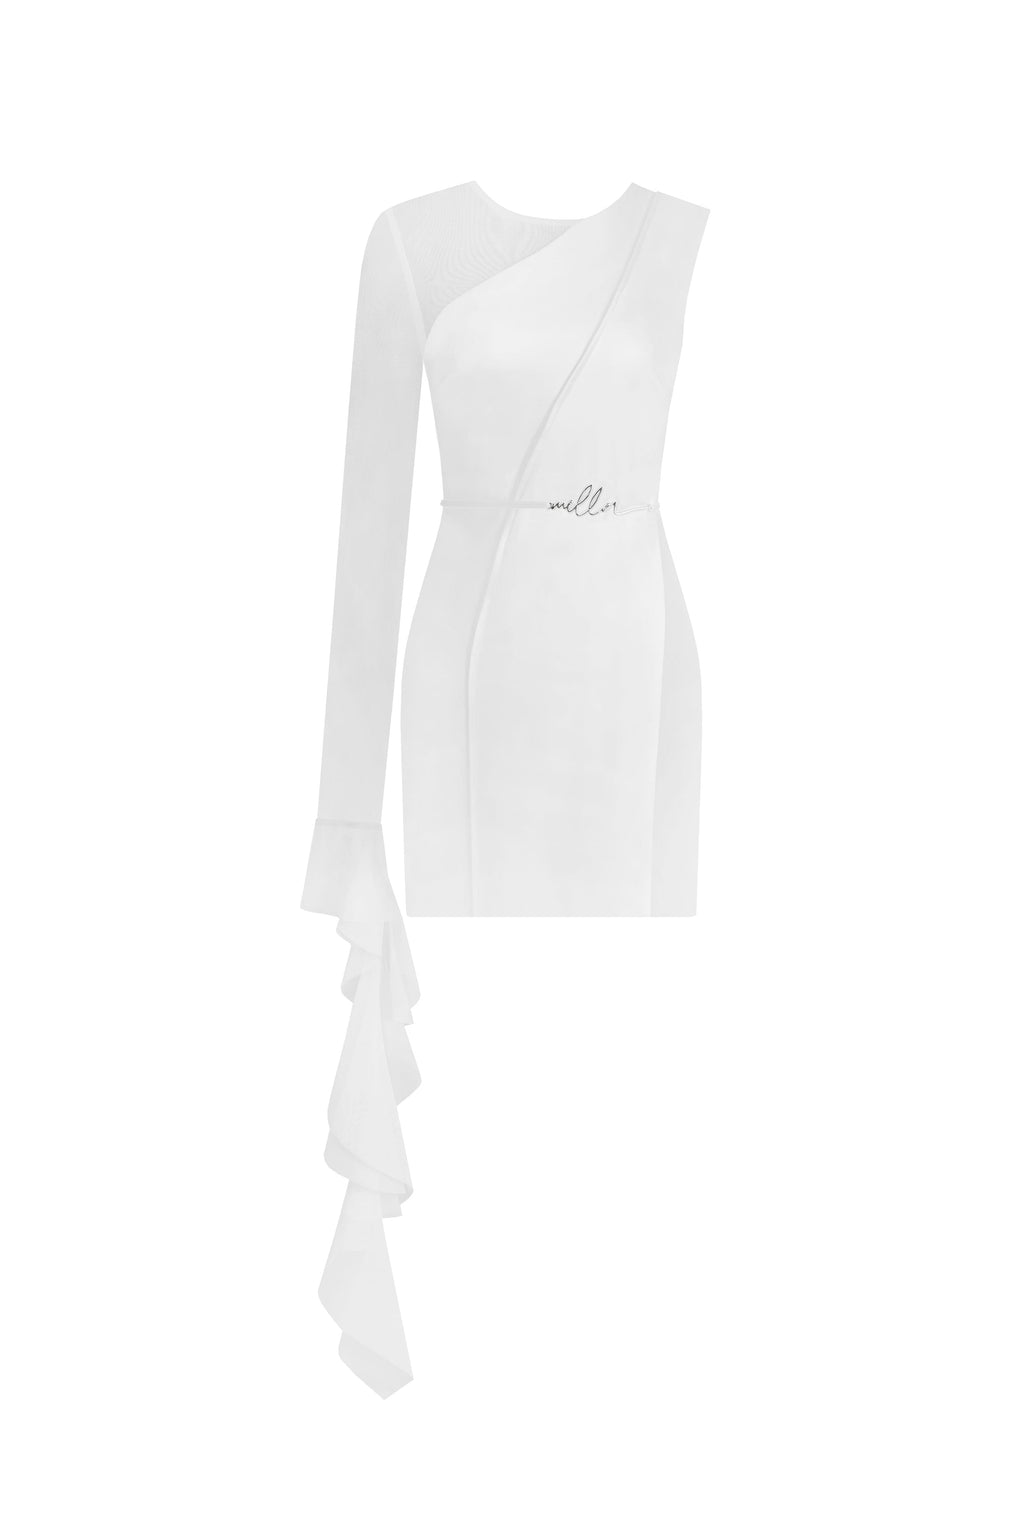 High-rise white suit pants, Xo Xo ➤➤ Milla Dresses - USA, Worldwide delivery